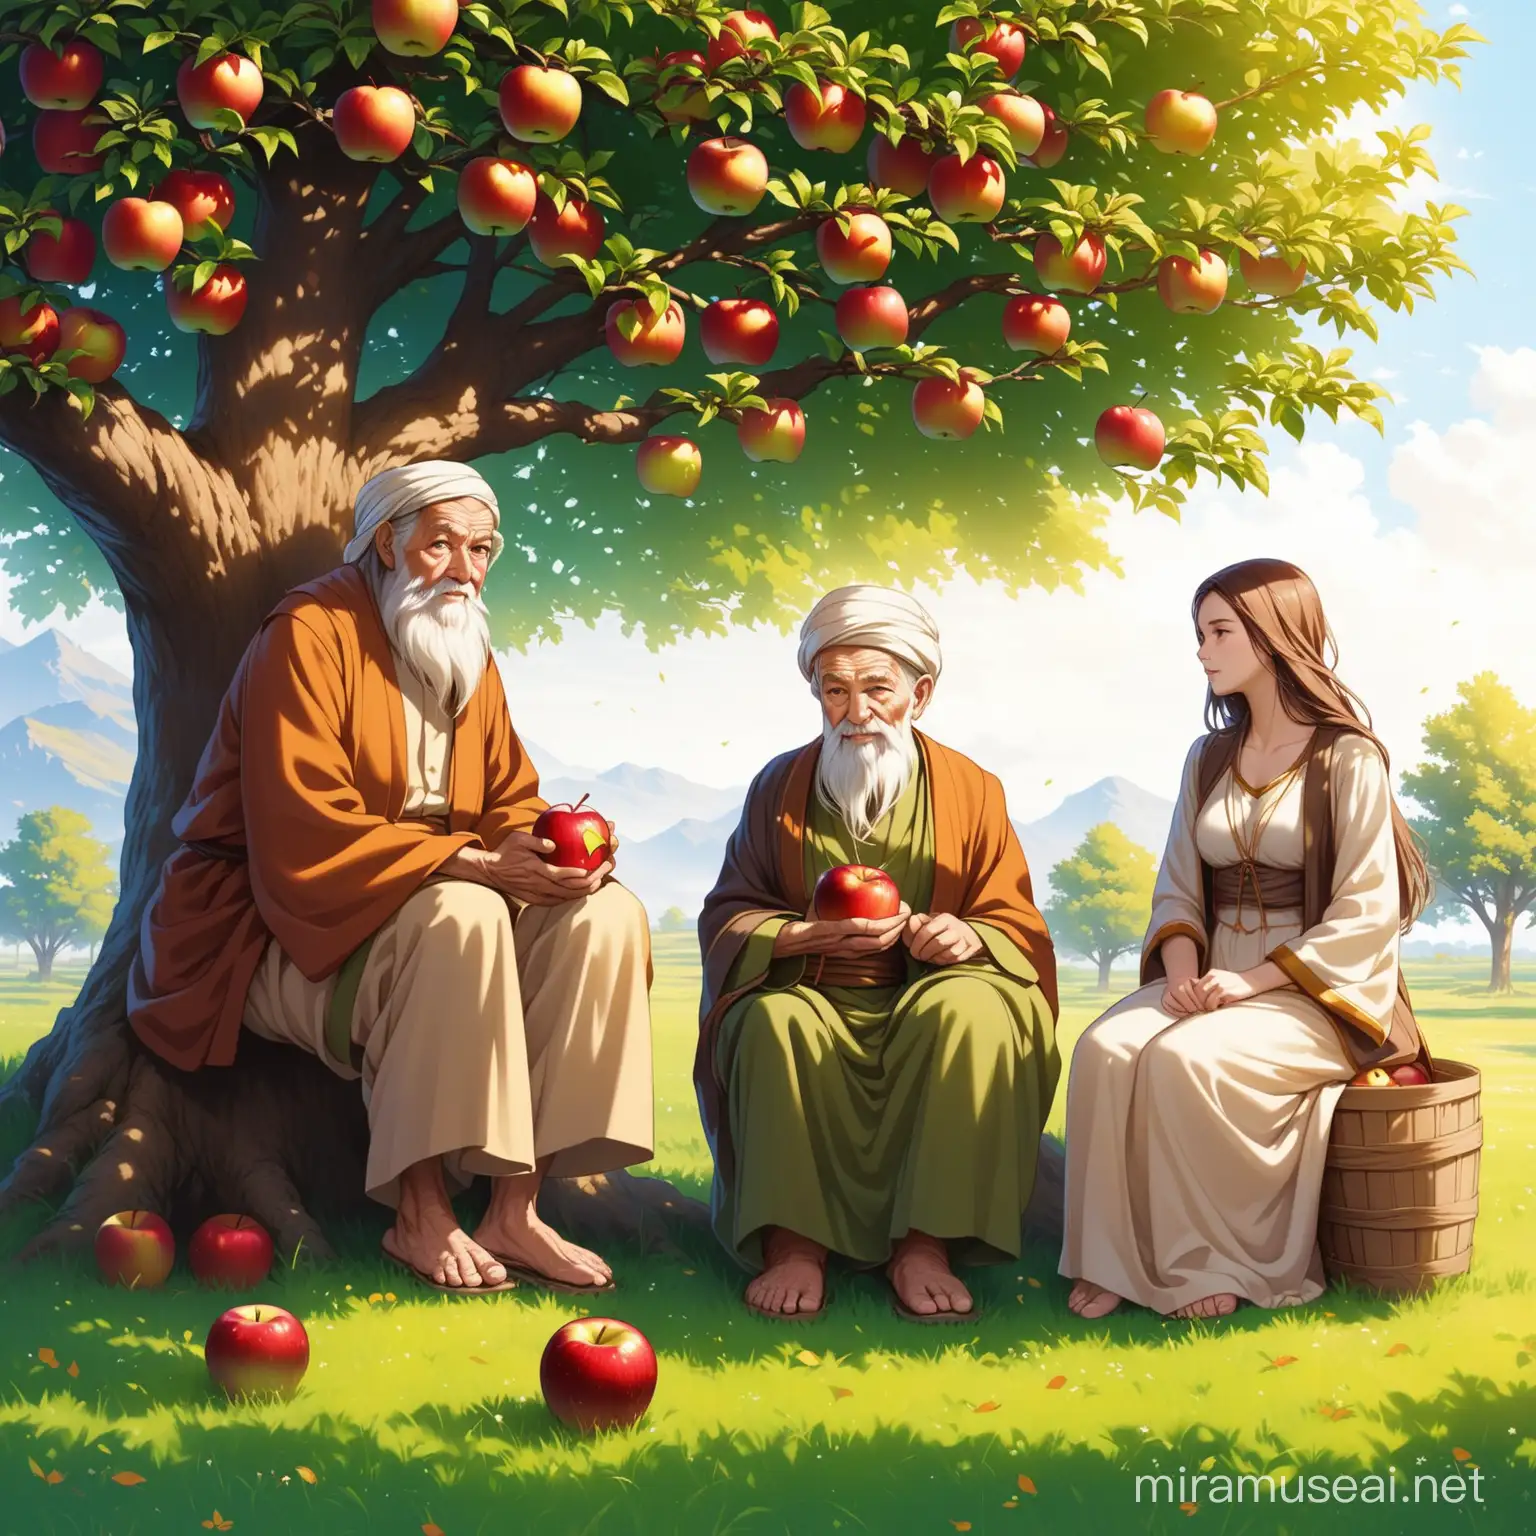 Intergenerational Wisdom Sharing Elderly Sage and Young Woman Beneath Apple Tree